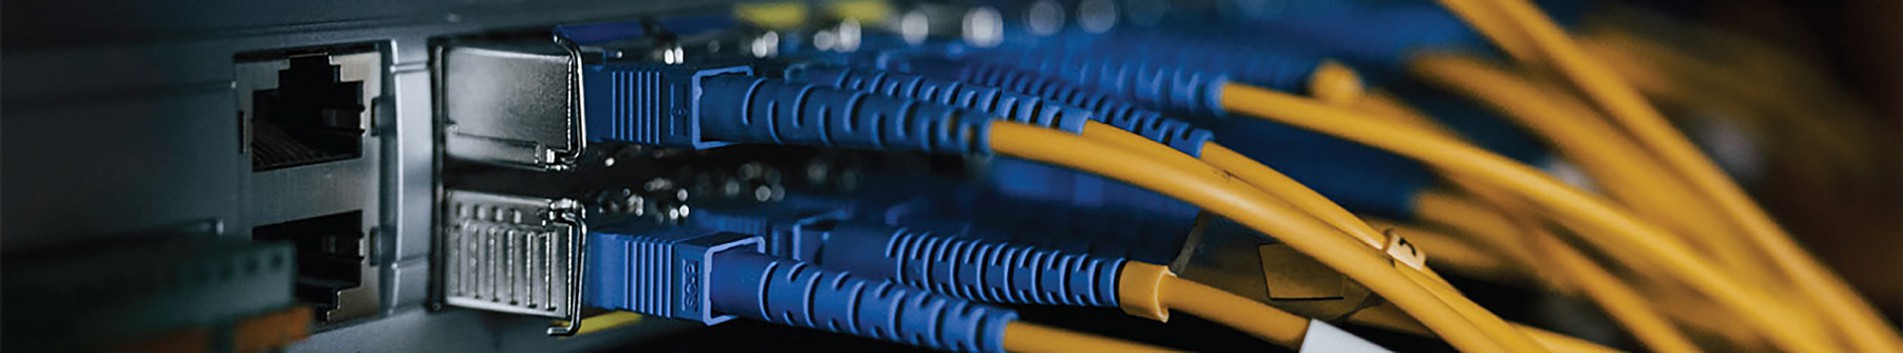 Photo of fiber cables plugged into patch panel